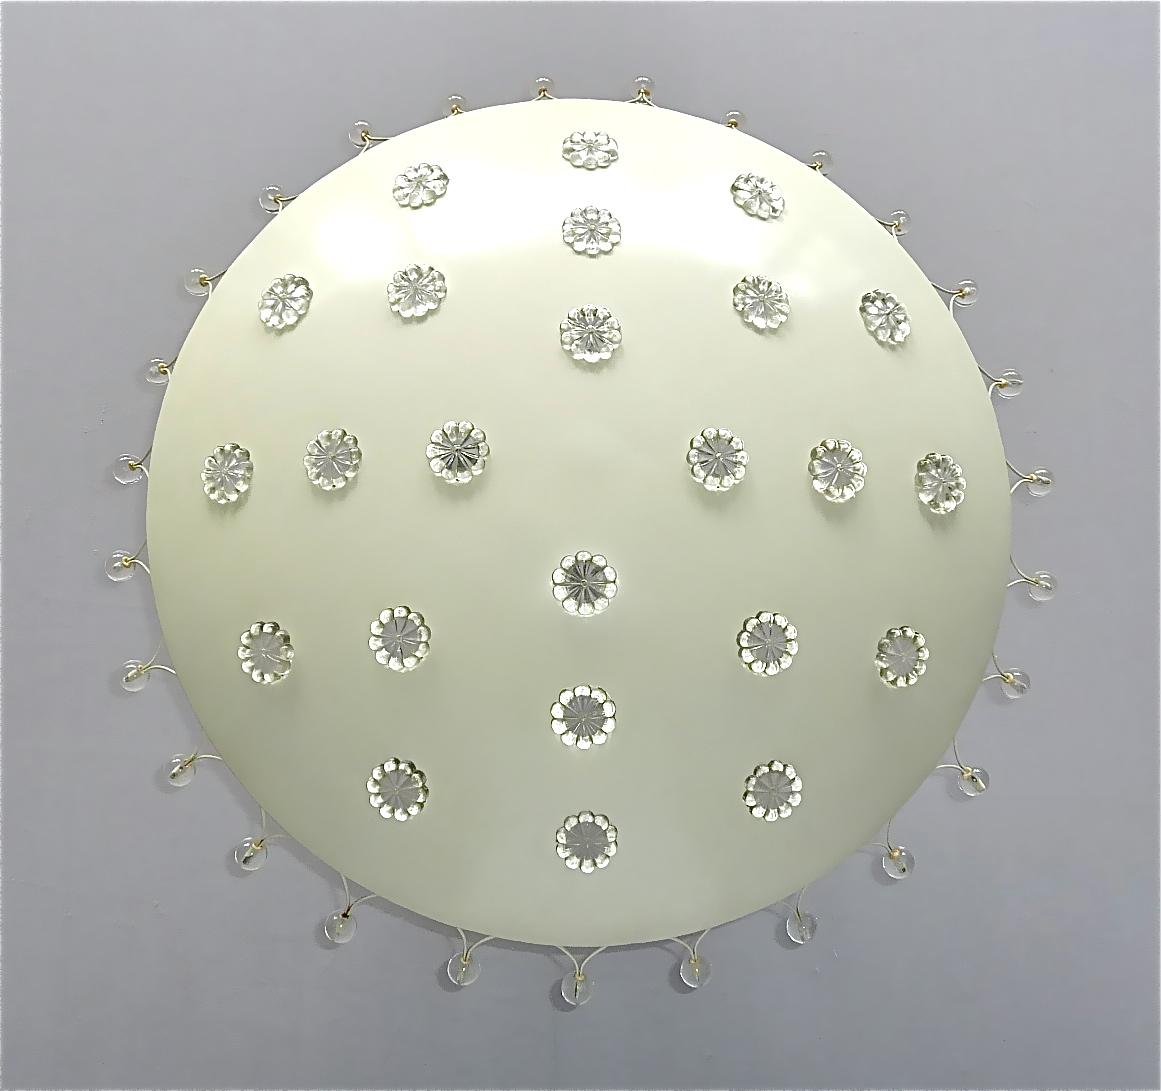 Large beautiful starburst ceiling light or flush mount flower chandelier in off- white enameled metal with patinated brass canopy, round crystal glass flower applications and glass pearls, designed by Emil Stejnar and executed by Rupert Nikoll,